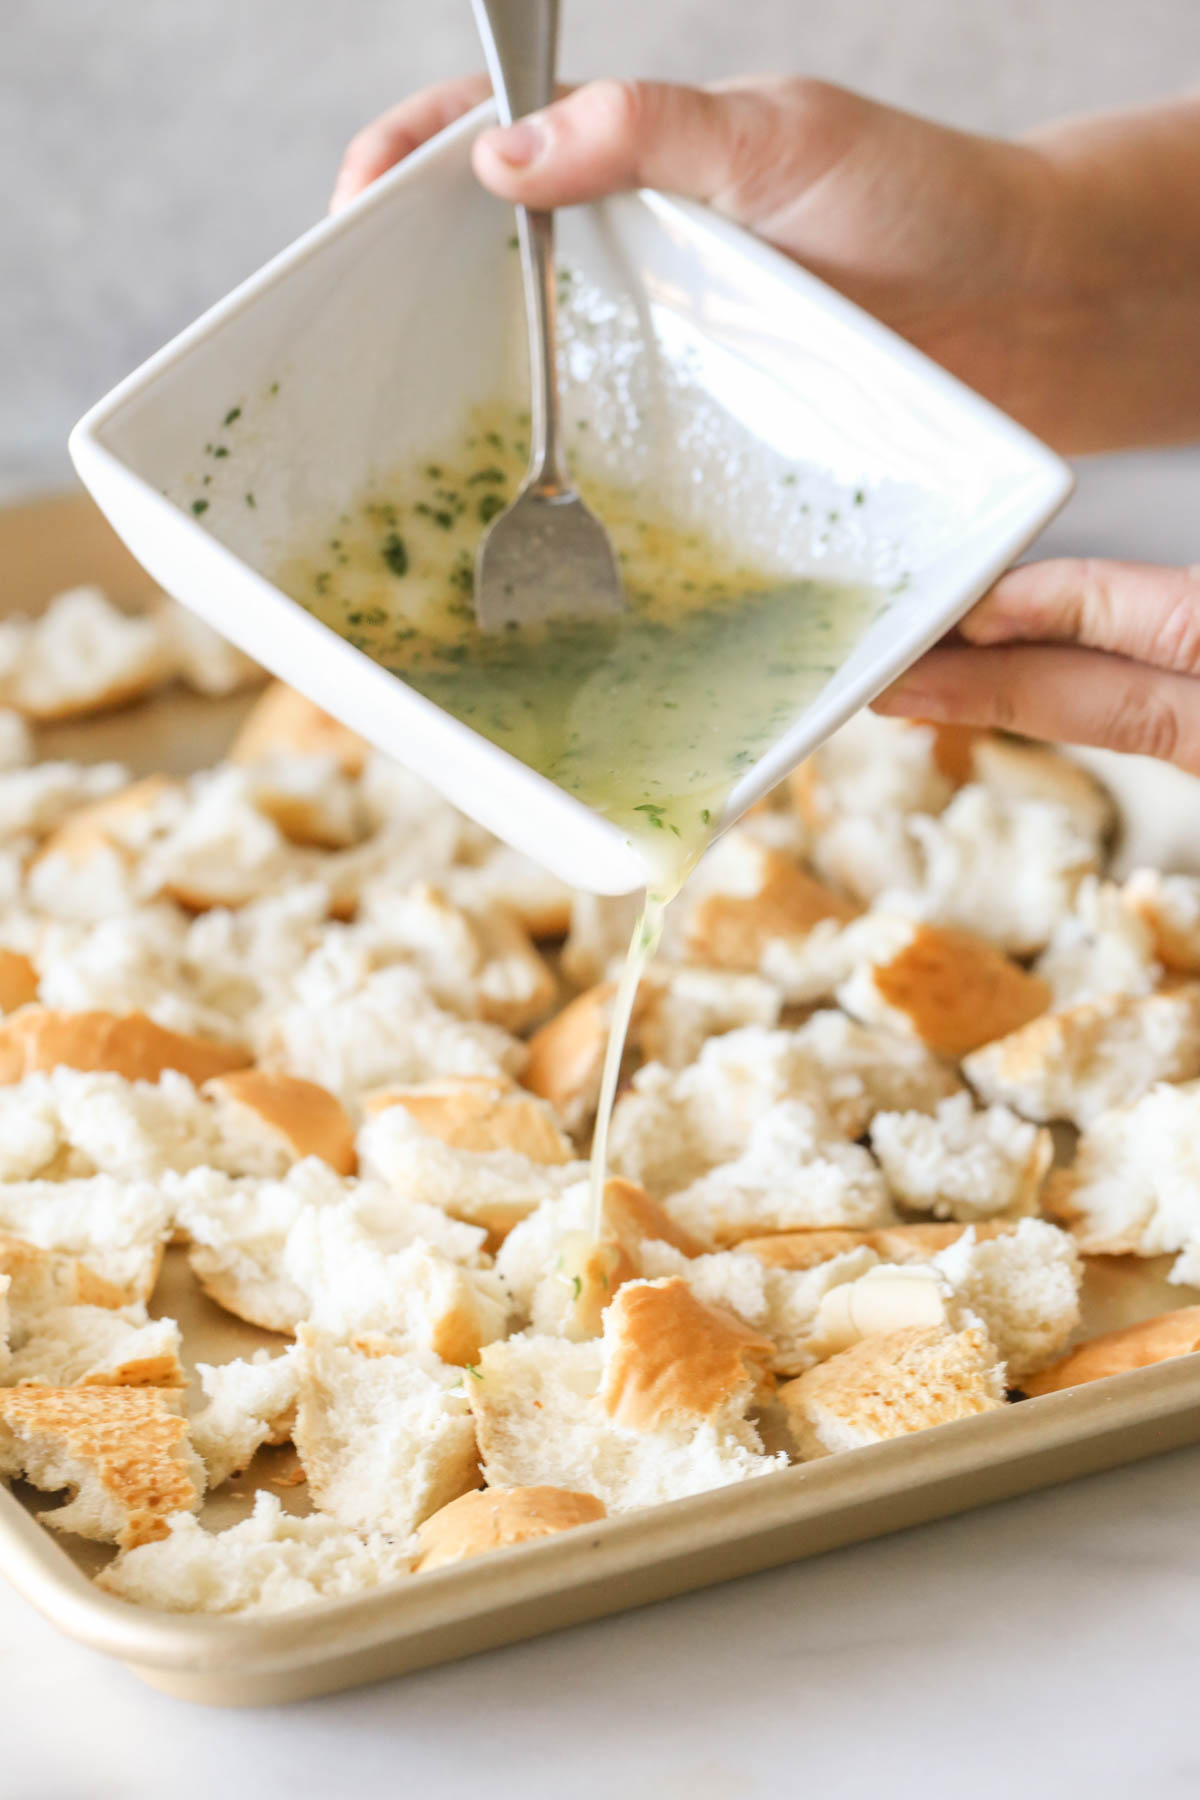 The butter mixture in a square bowl being poured over the French bread pieces on the baking sheet to make Rustic Buttery Garlic Croutons.  